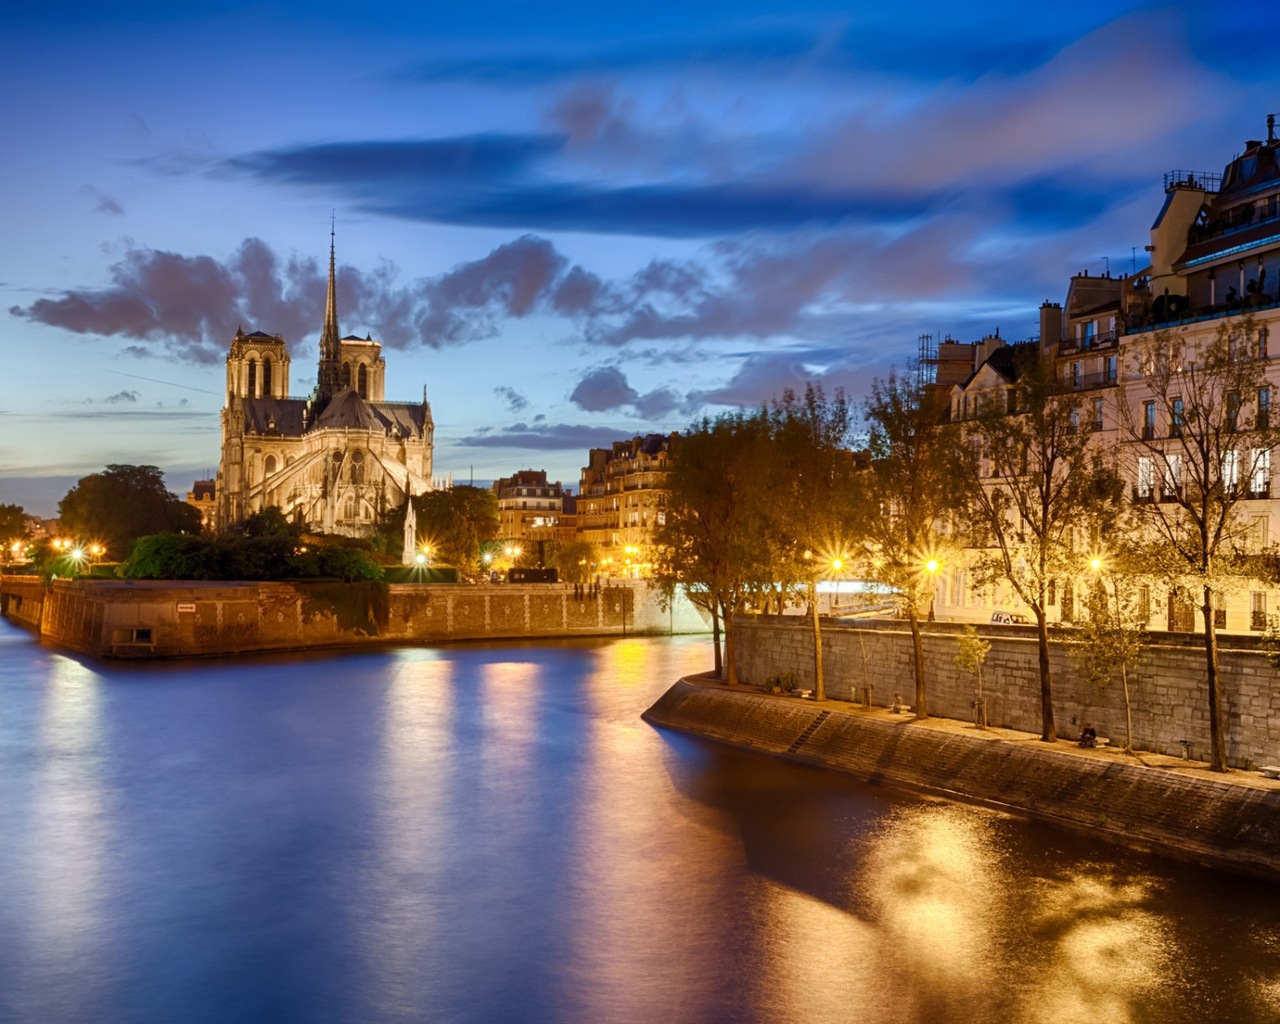 Notre Dame HD Wallpapers #1 - 1280x1024